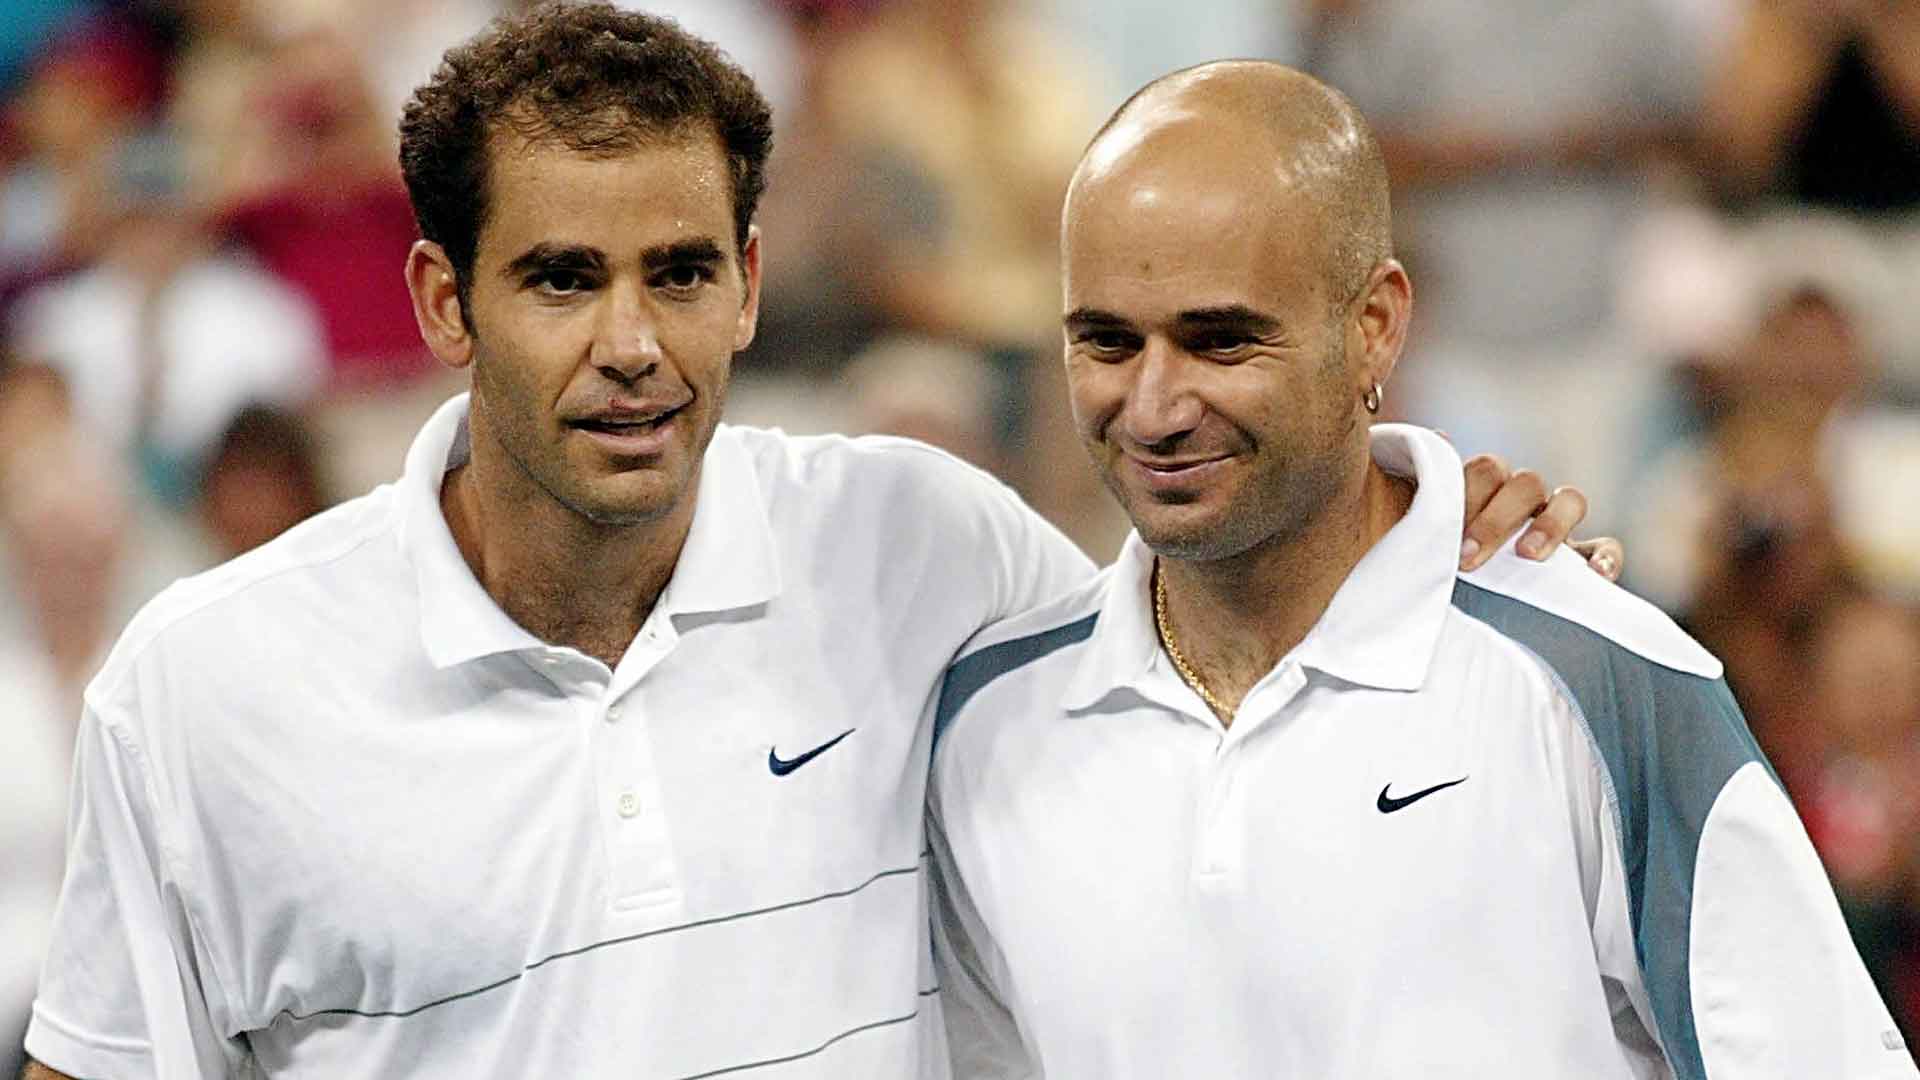 Pete Sampras and Andre Agassi met 30 times over the course of their professional careers.